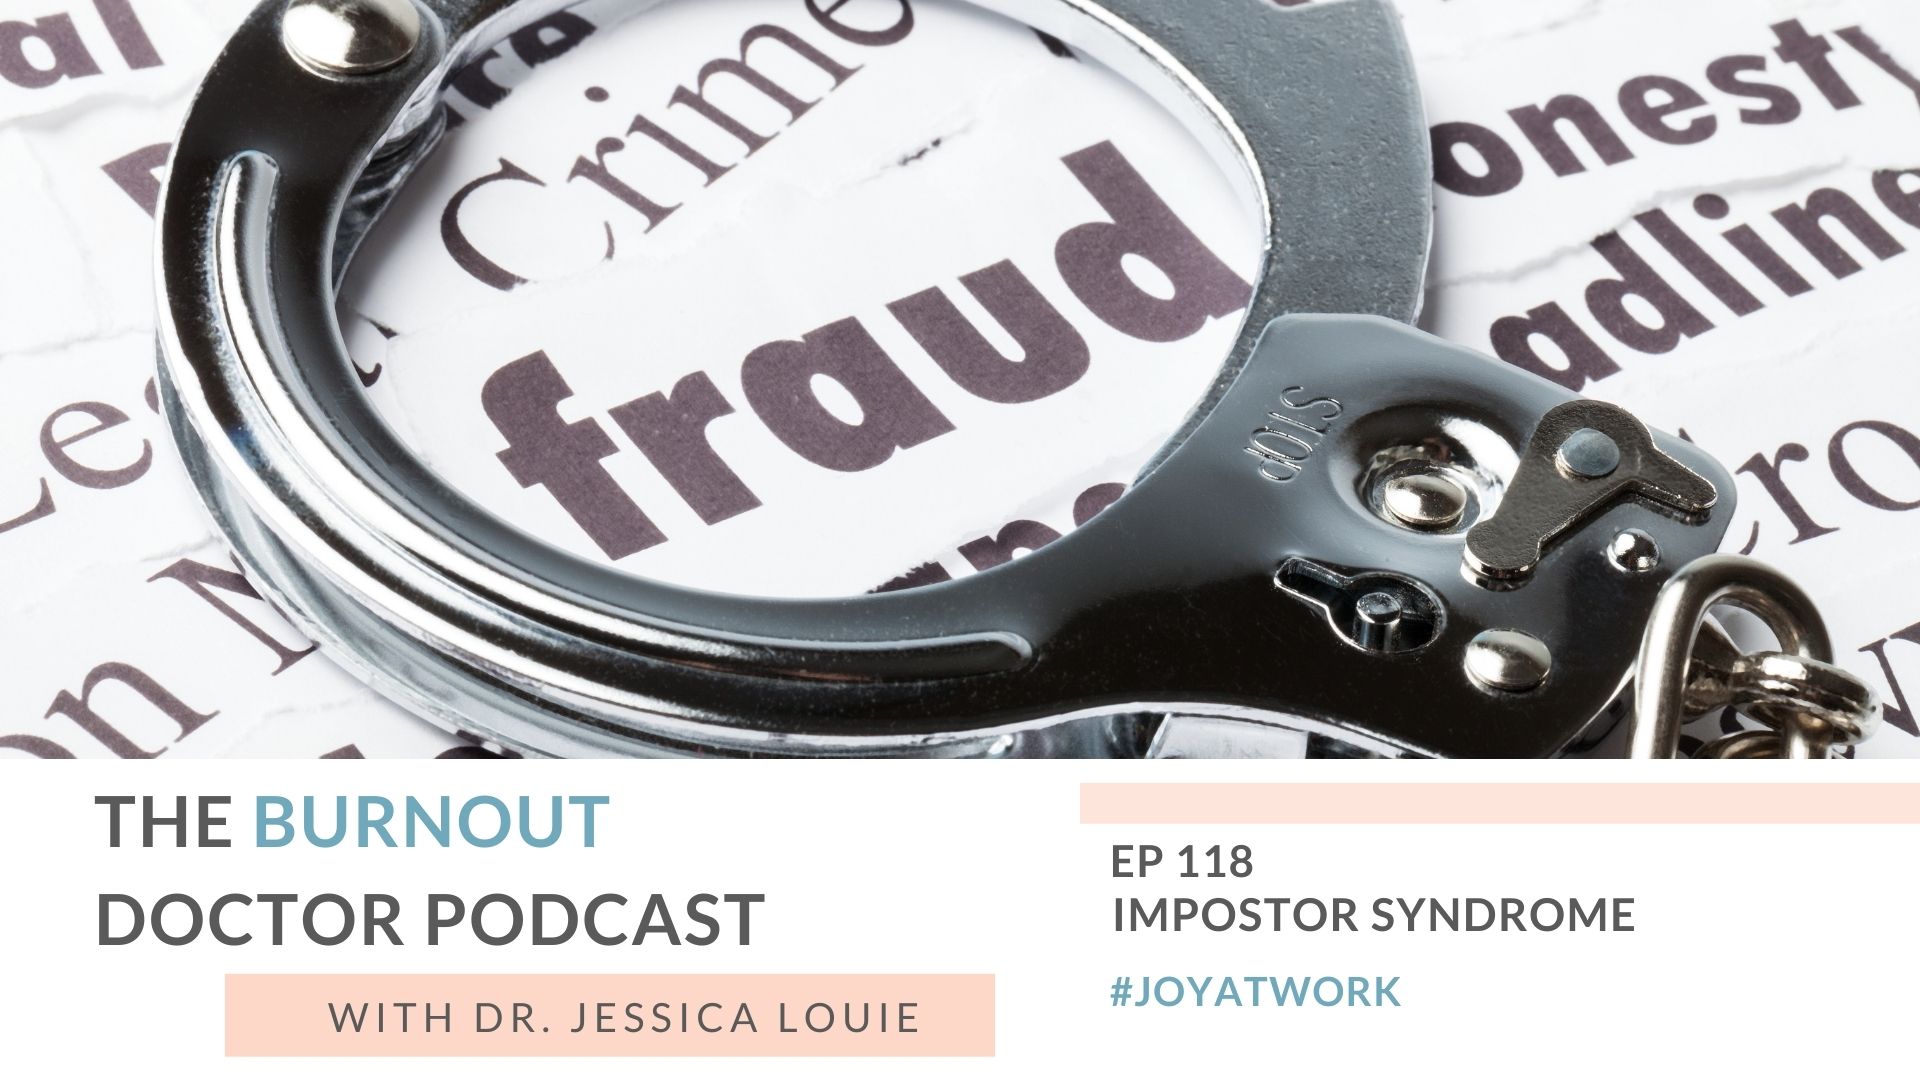 How to avoid impostor syndrome. What is impostor syndrome. How does impostor syndrome affect burnout. Pharmacist burnout help. Keynote speaker on burnout and simplifying. The Burnout Doctor Podcast with Dr. Jessica Louie